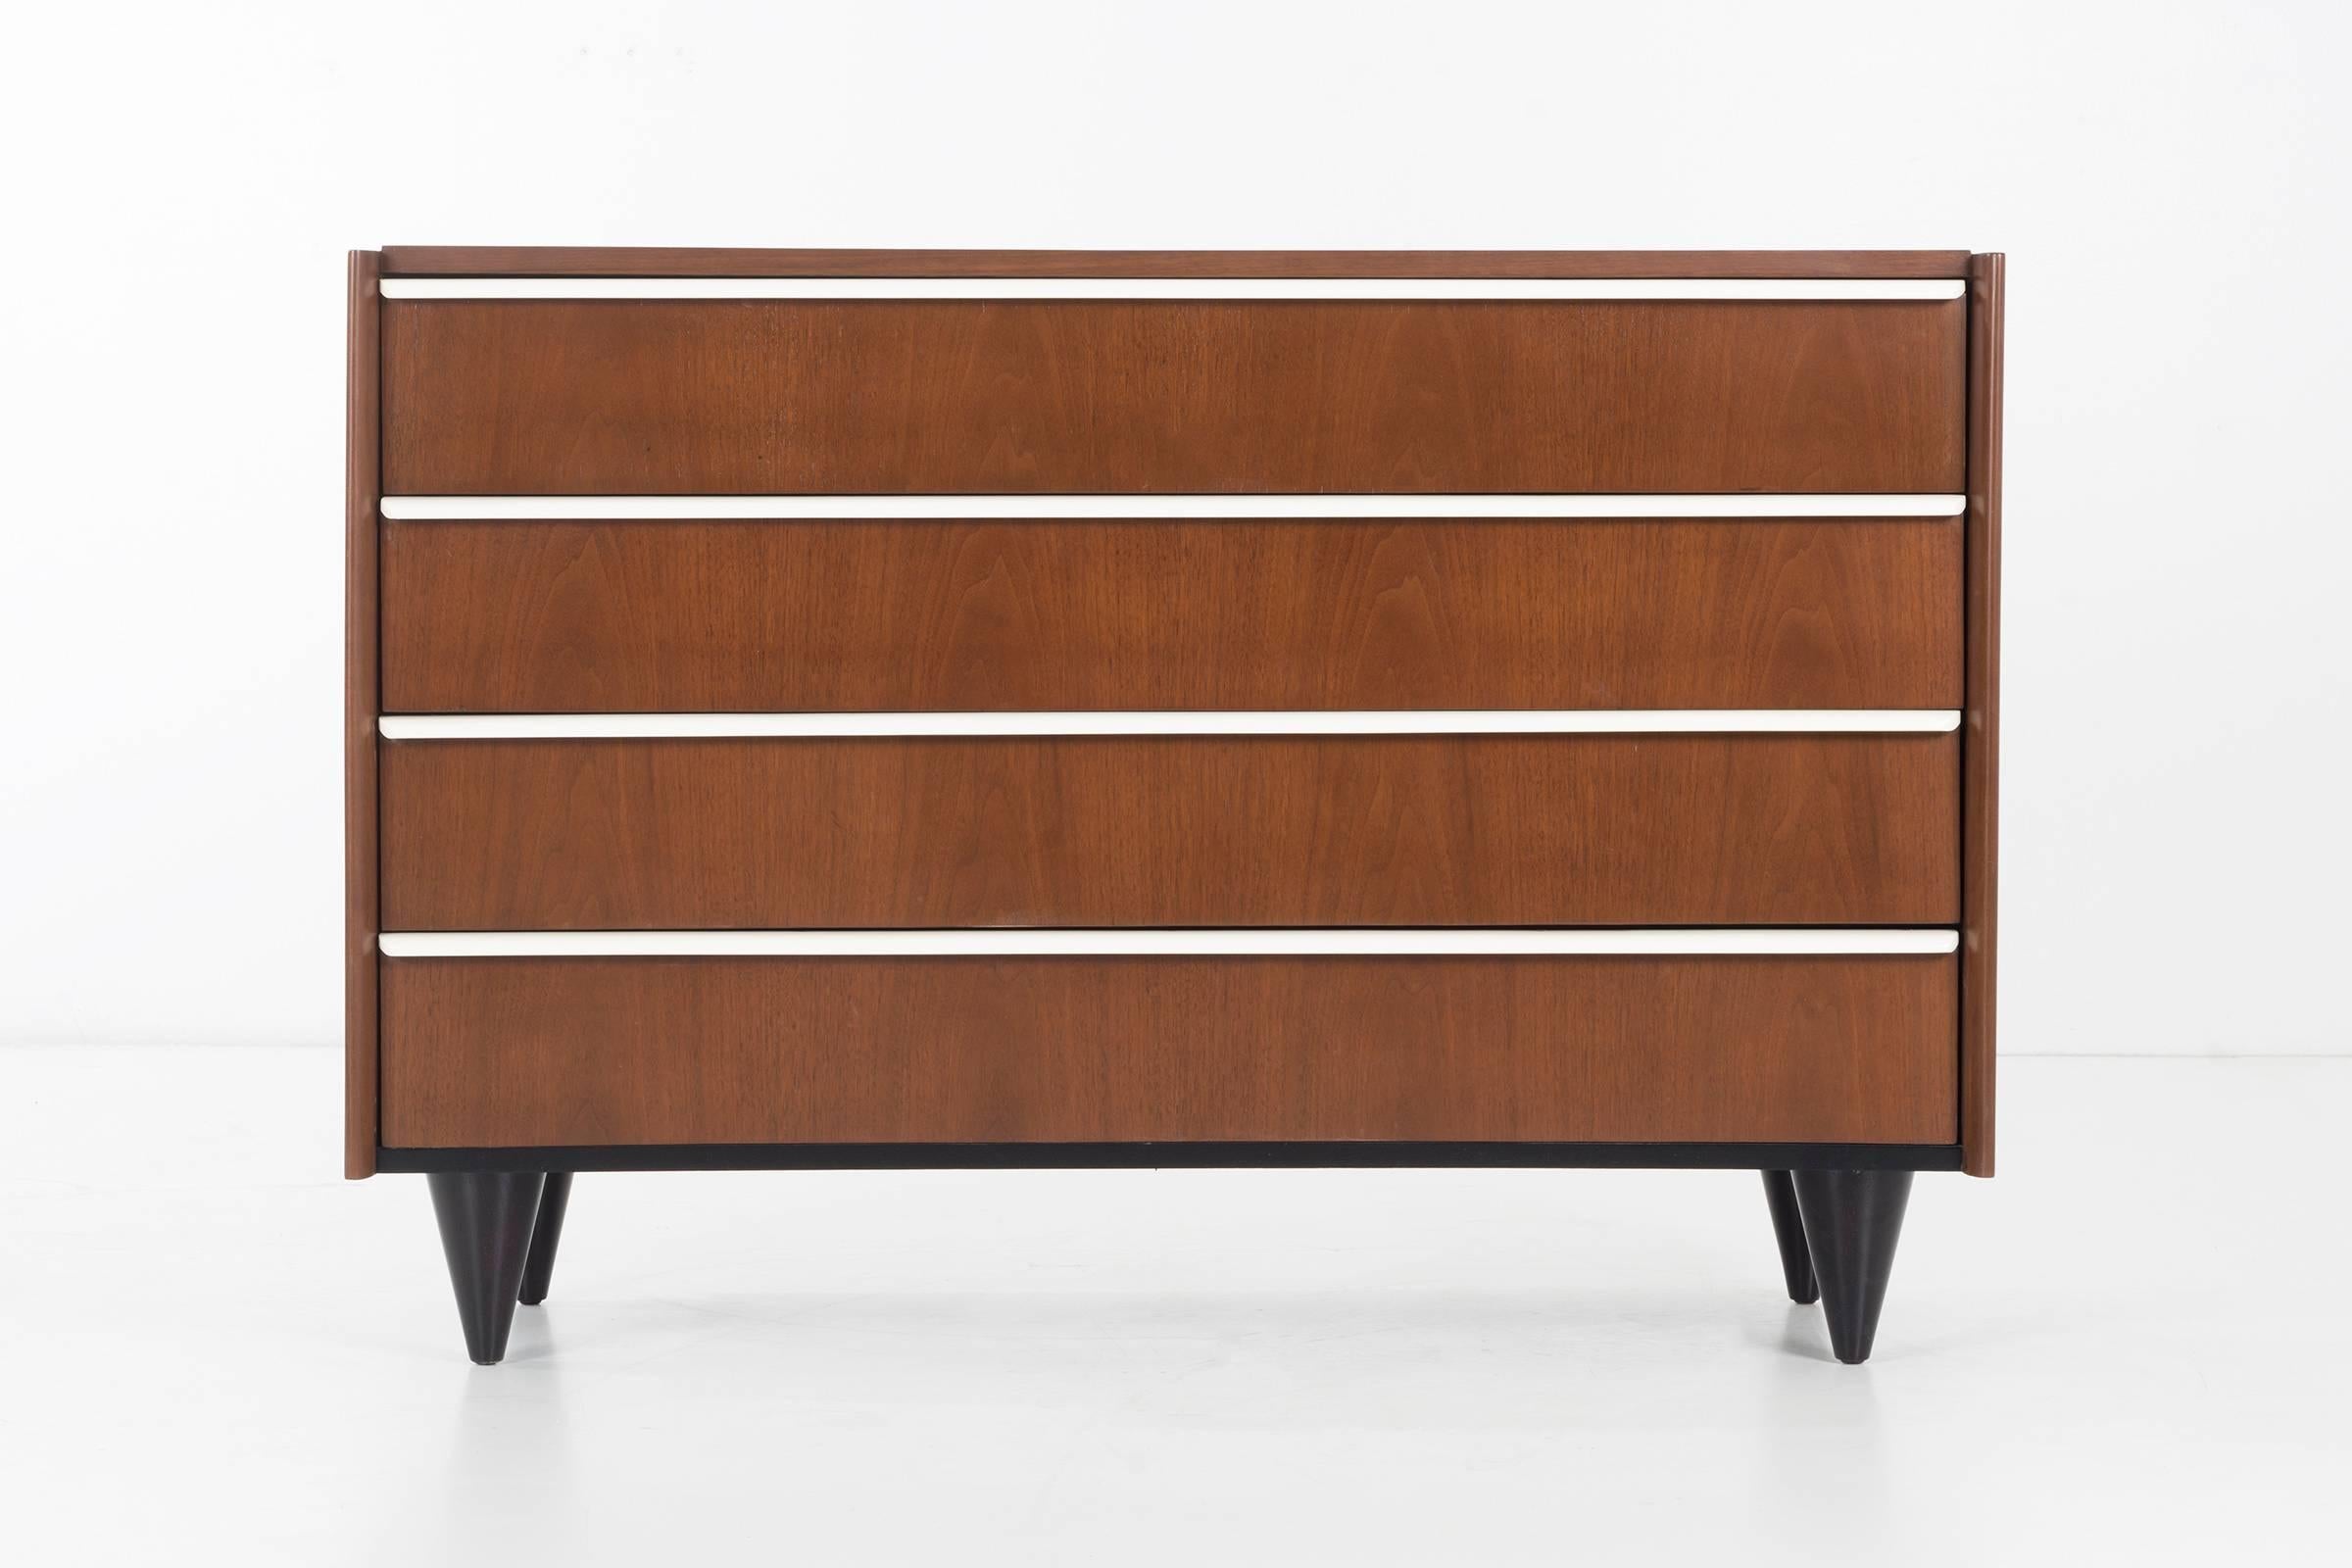 Rohde Classic pair of dressers, four-drawer with long contrasting finger pulls as a element of the design aesthetic.
Bookmatched cathedral veneer in walnut.
Solid turned tapered signature legs.
Professionally restored, all drawers excellent